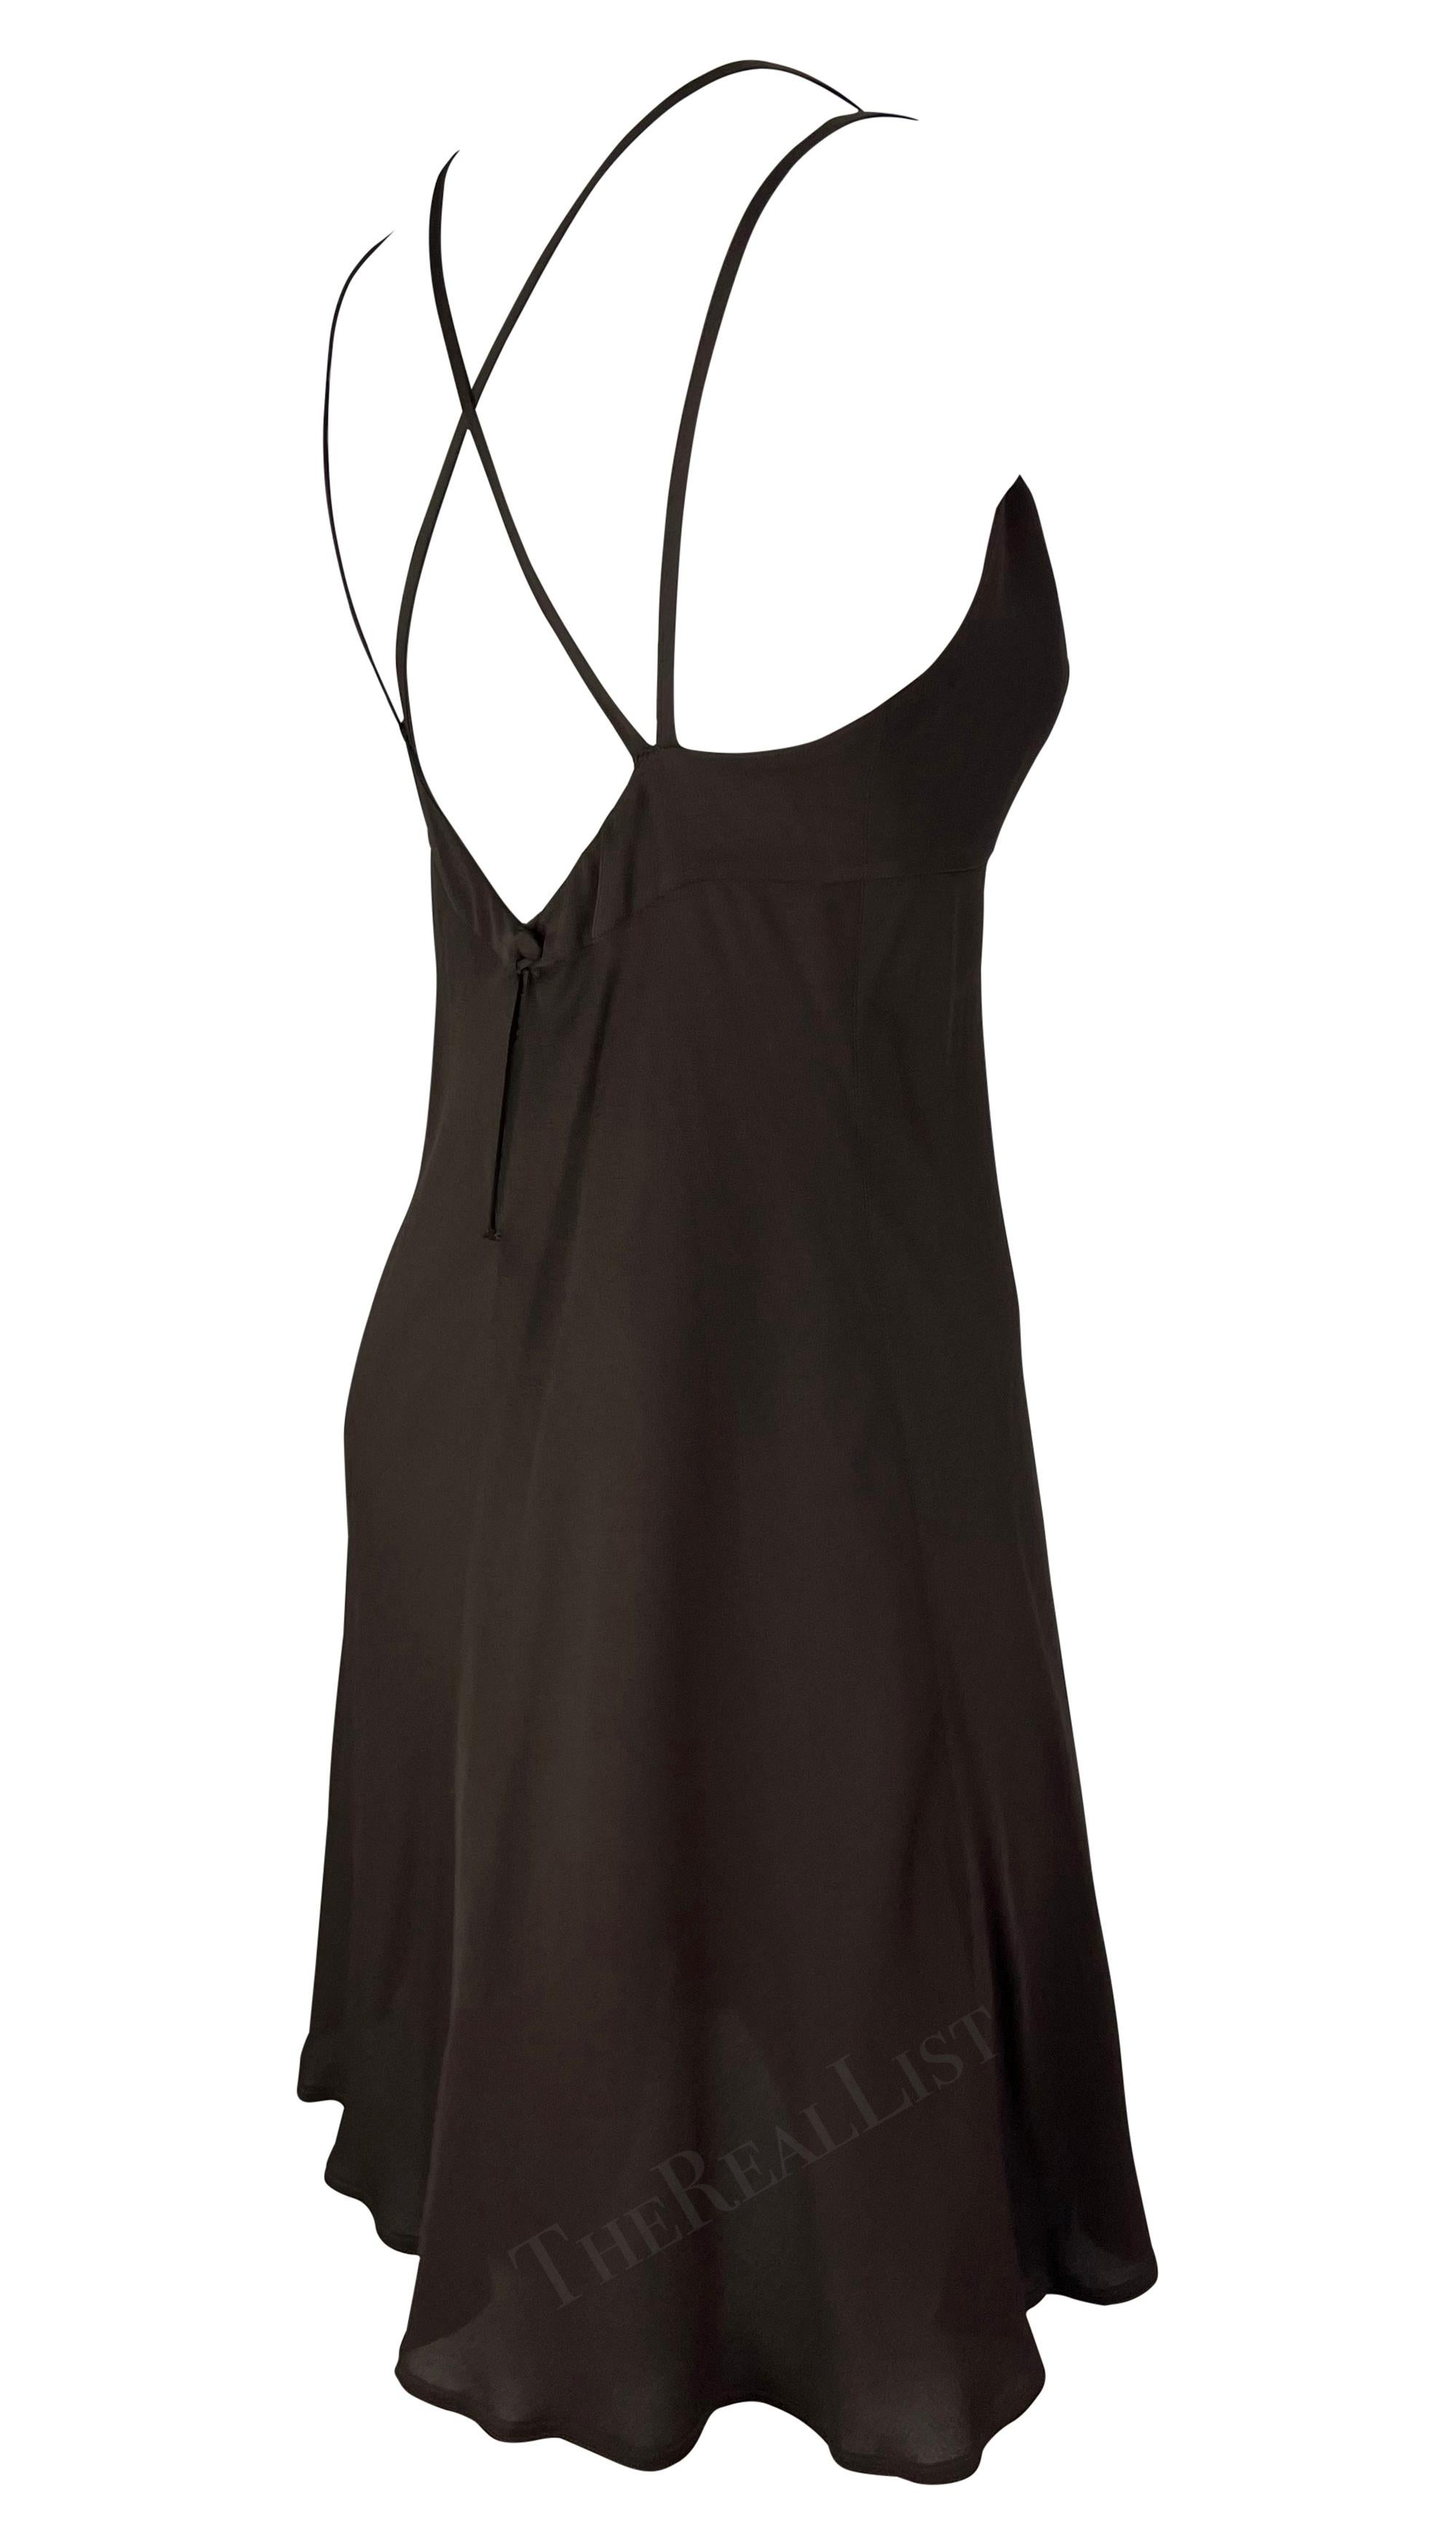 Presenting a girly brown Fendi mini dress, designed by Karl Lagerfeld. From the 1990s, this dress features a scoop neckline, distinctive double shoulder straps that cross over an exposed back, and a soft flare at the hem. A must-have, this dress